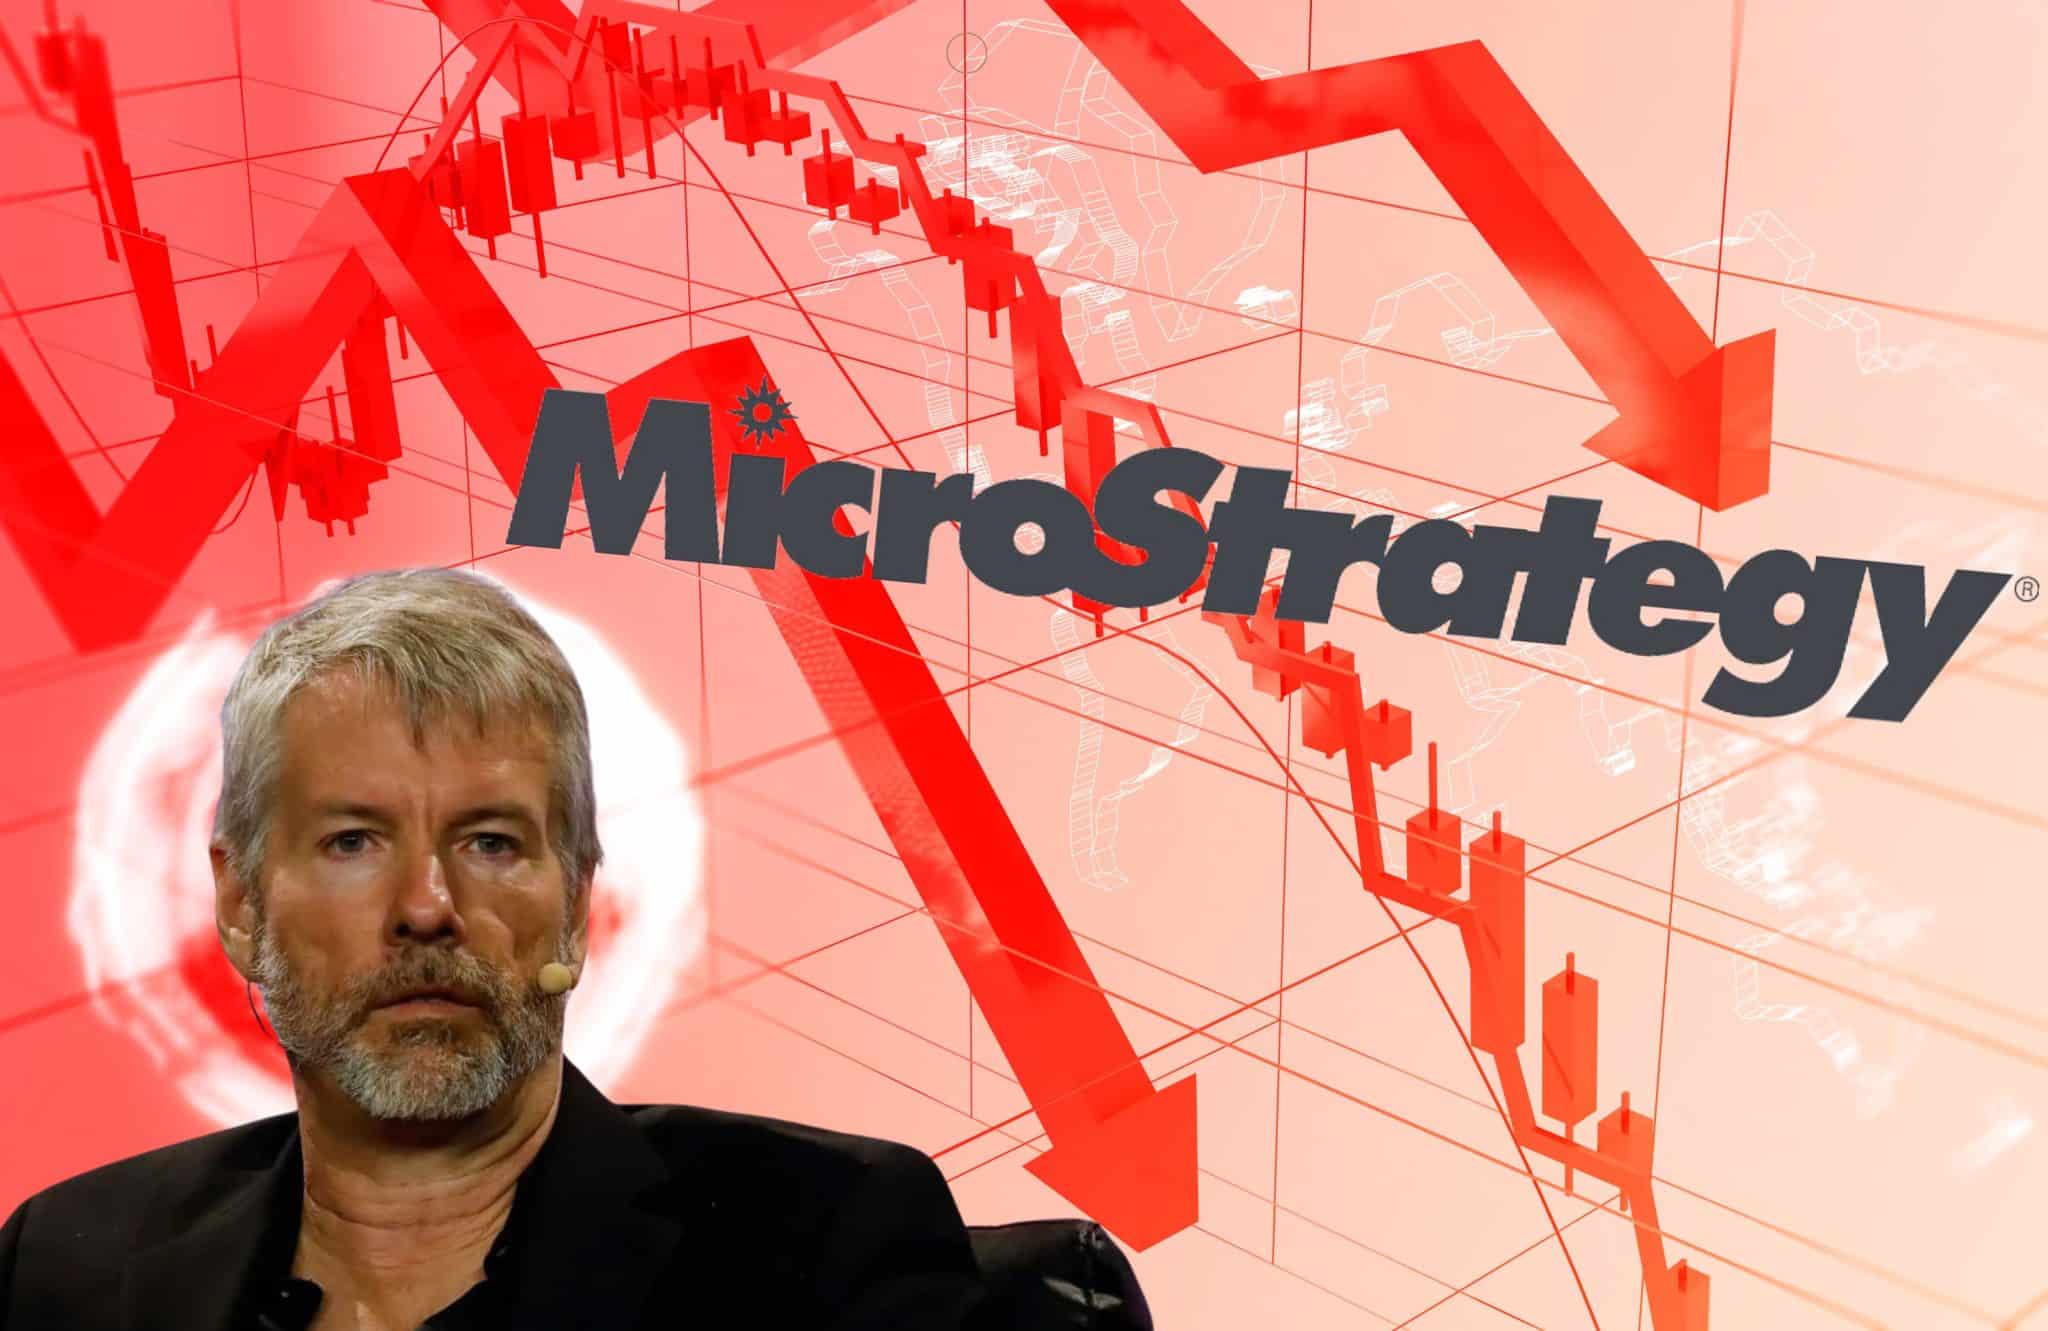 Michael Saylor's Microstrategy Stock is in the crosshairs of eagle-eyed short traders as Bitcoin shorts stack up amid BTC price resistance.